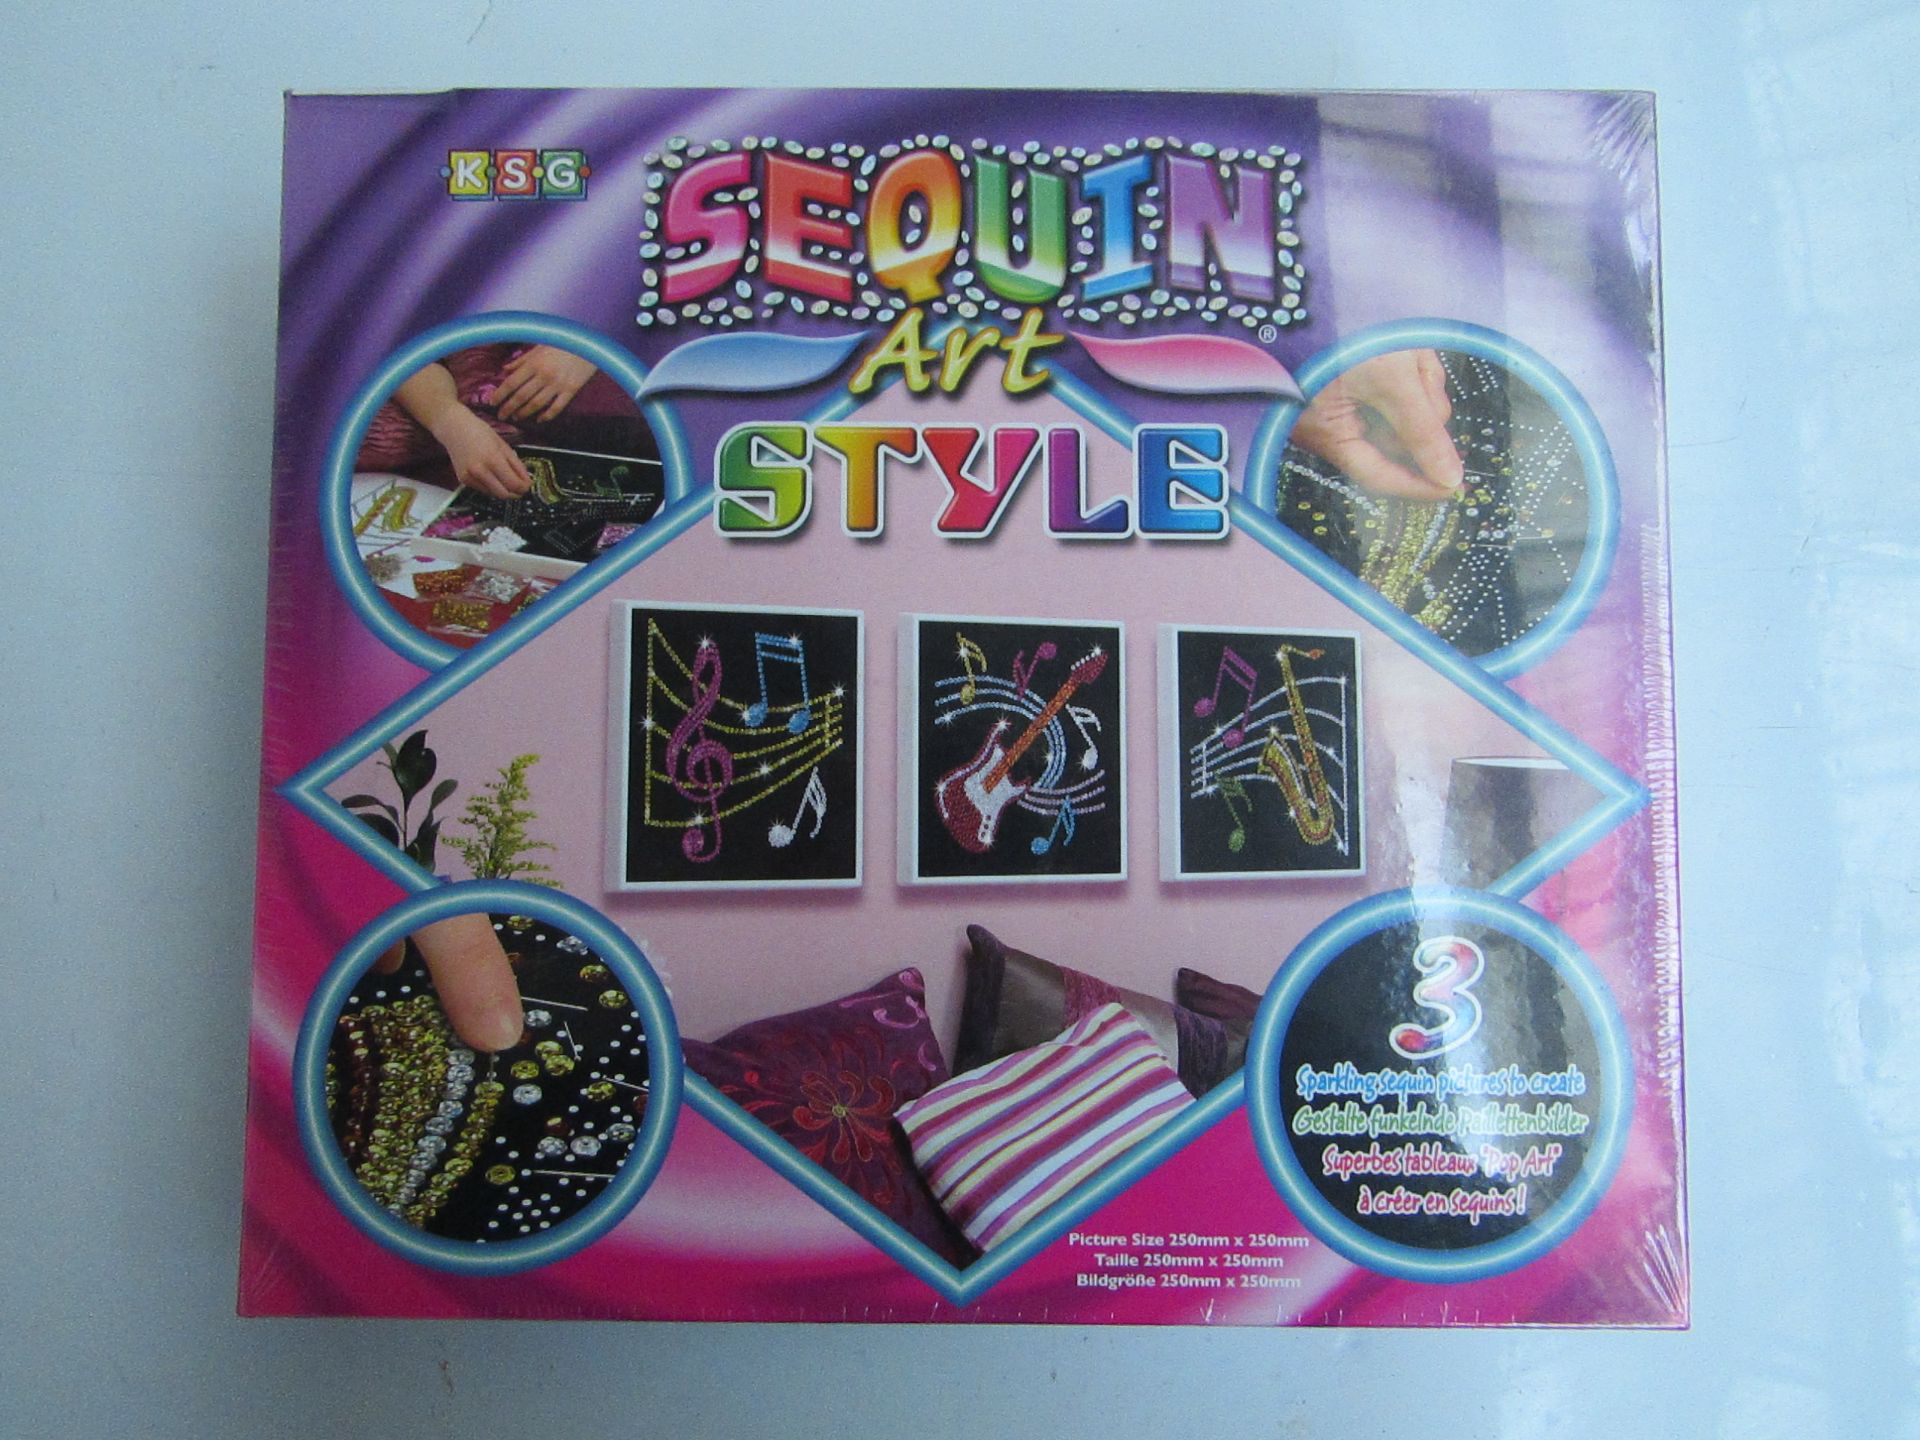 Sequin art stencil sets, new and boxed.